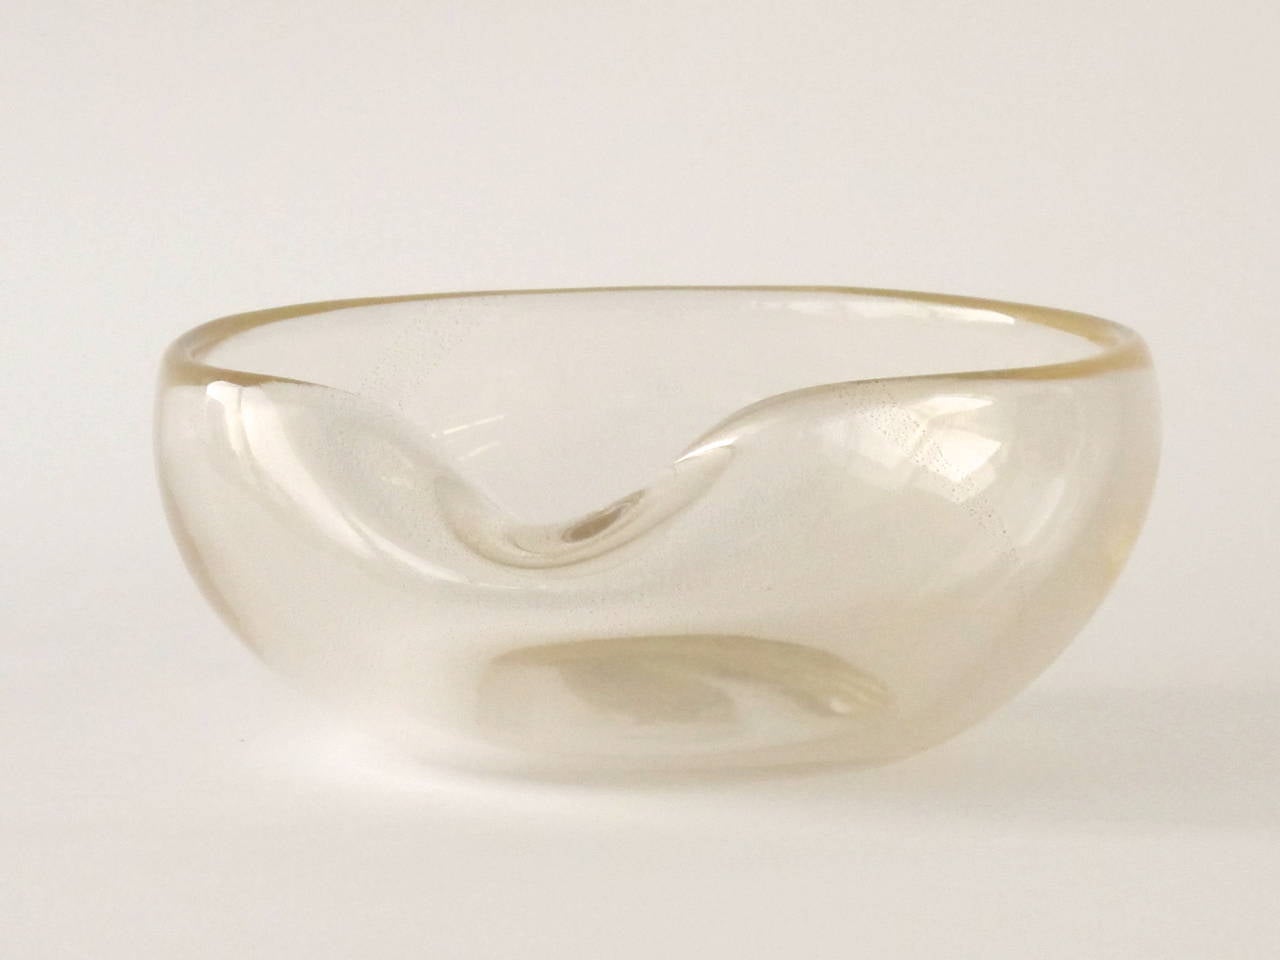 This unique transparent bowl by Archimede Seguso is enriched with gold flecks, giving the object a fascinating appearance. Venetian Archimede Seguso (1909-1999) was a Murano glass Maestro. 

The round shape of the bowl is interrupted by a dent.